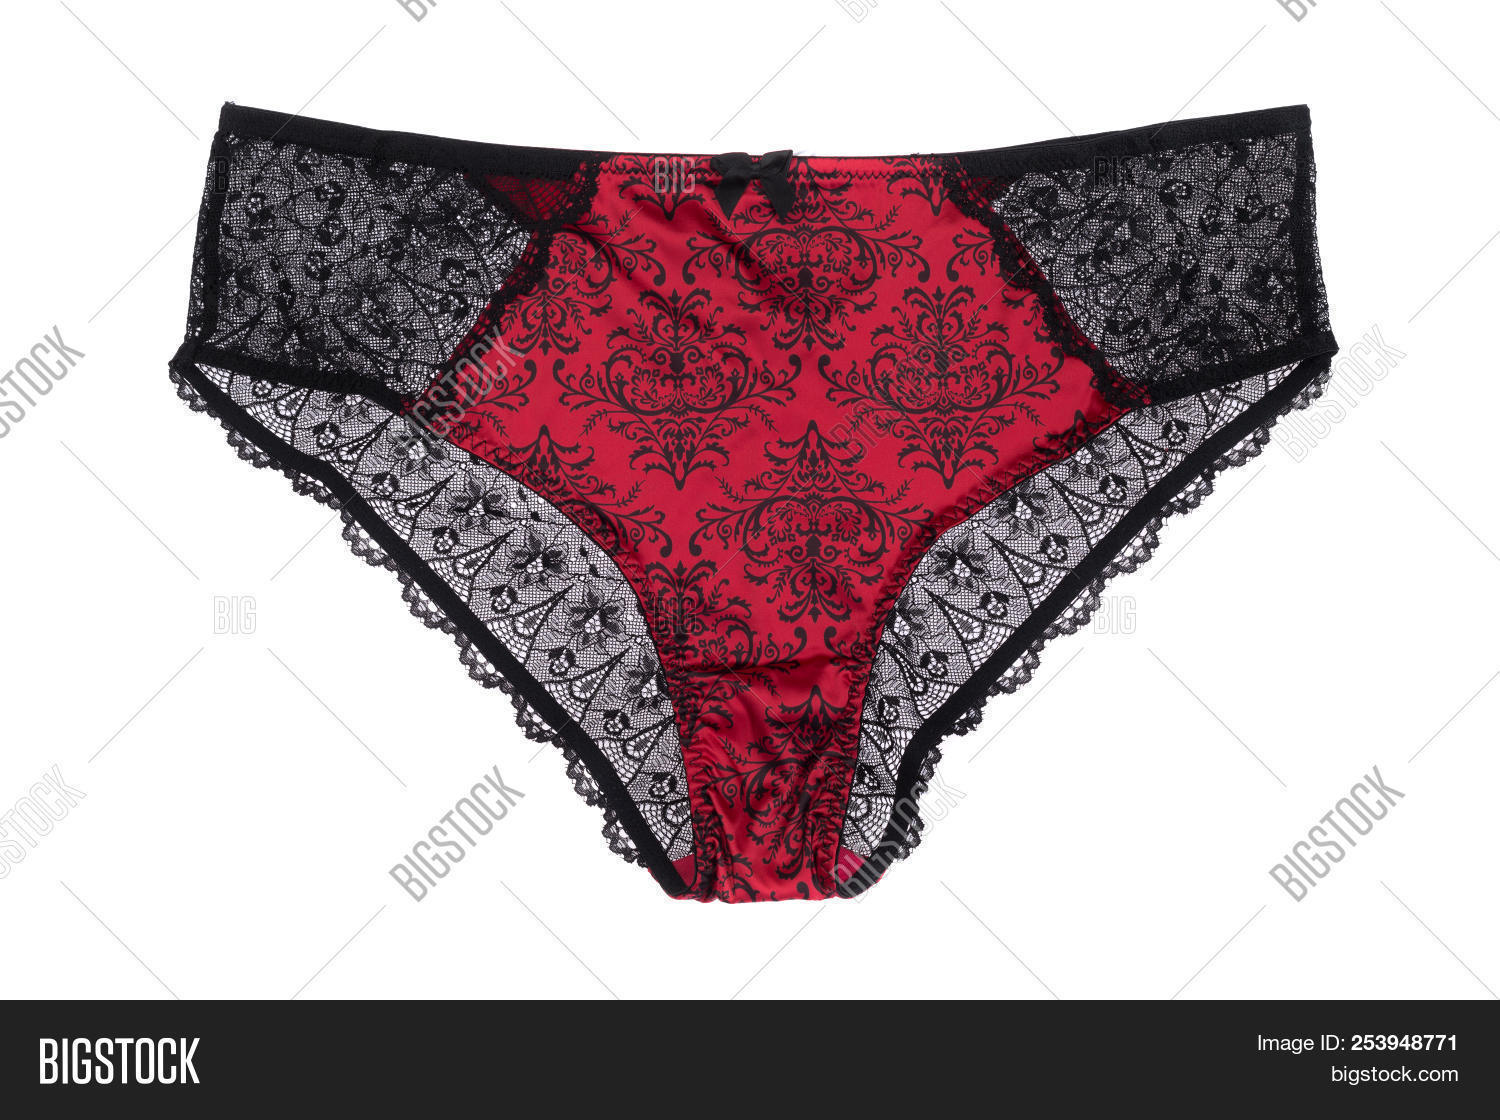 adrian yap recommends red and black lace panties pic